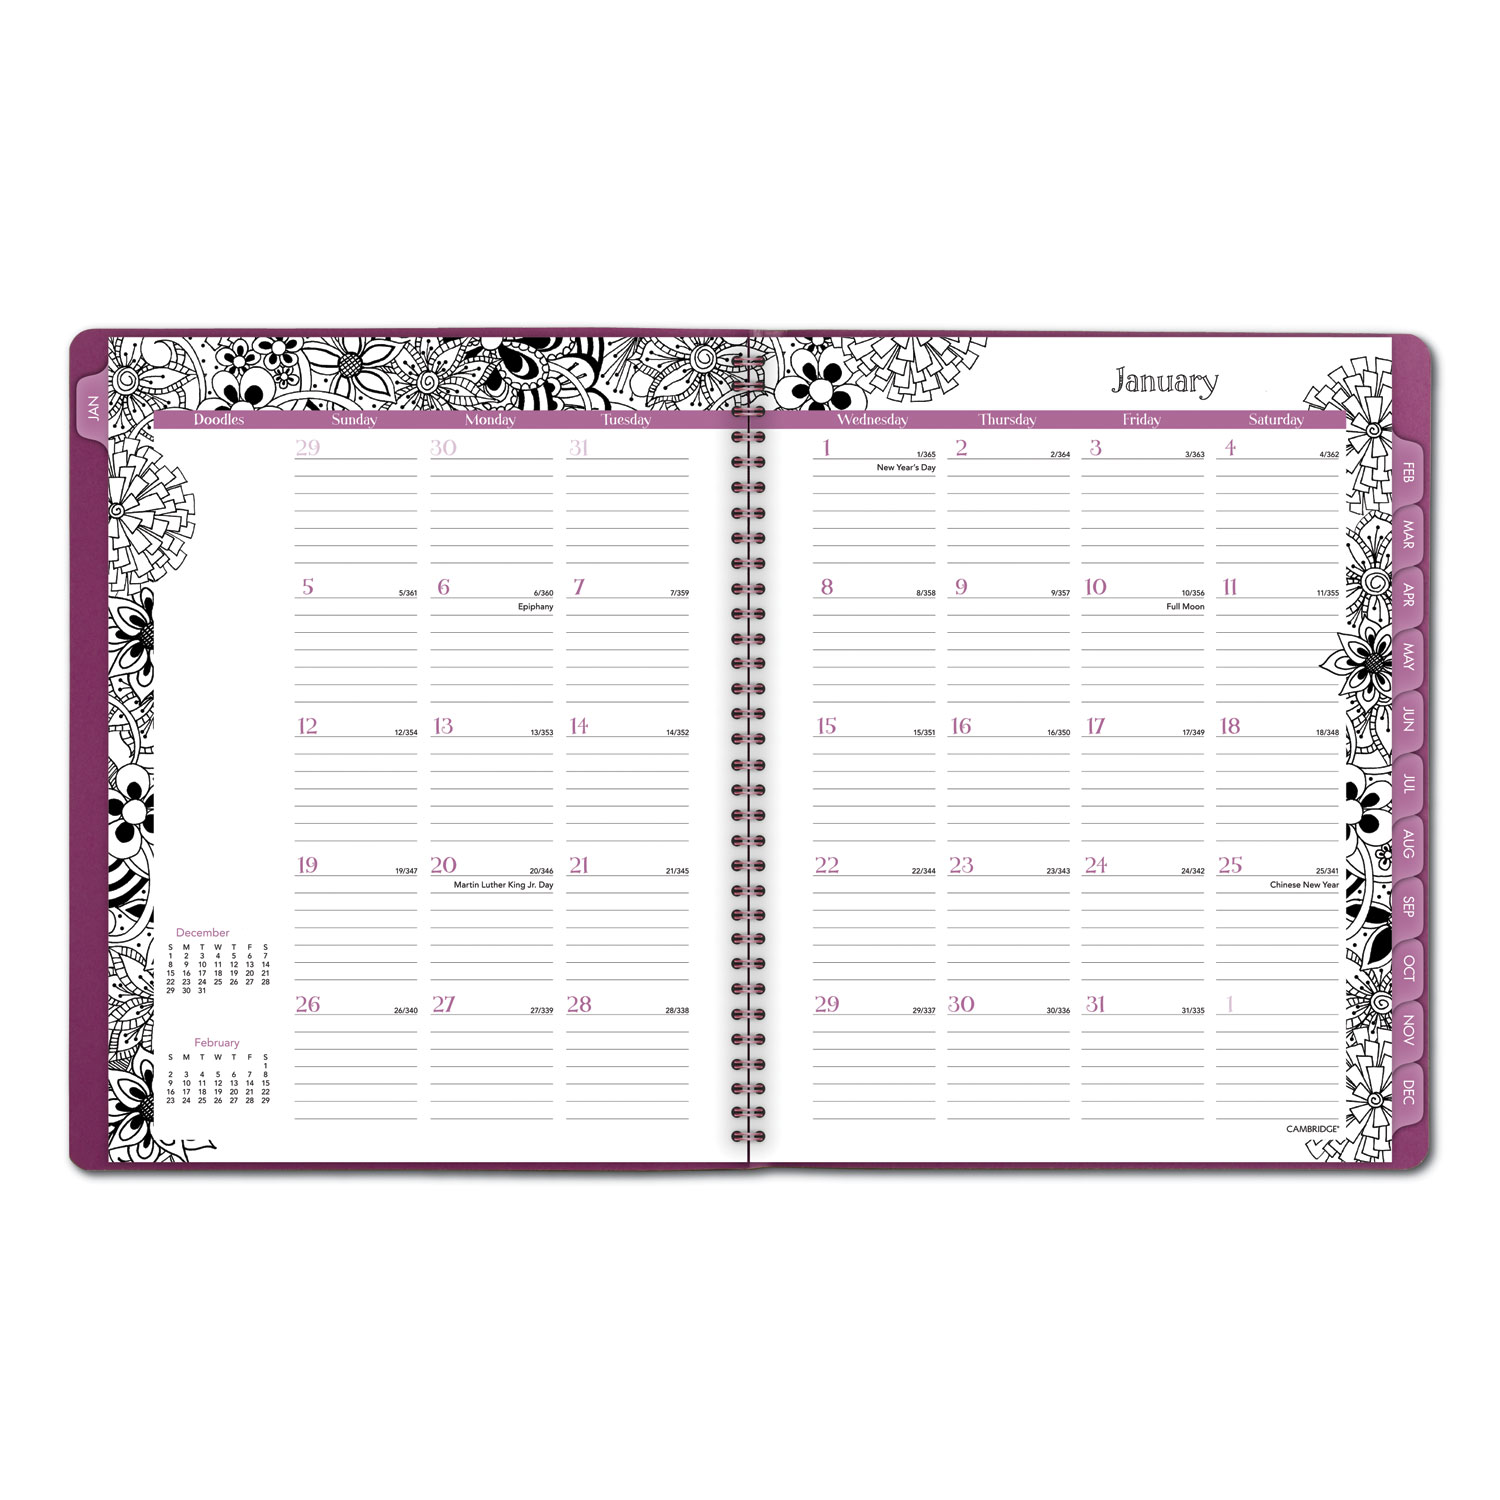 Floradoodle Professional Weekly/Monthly Planner, 11 x 8 1/2, 2020-2021